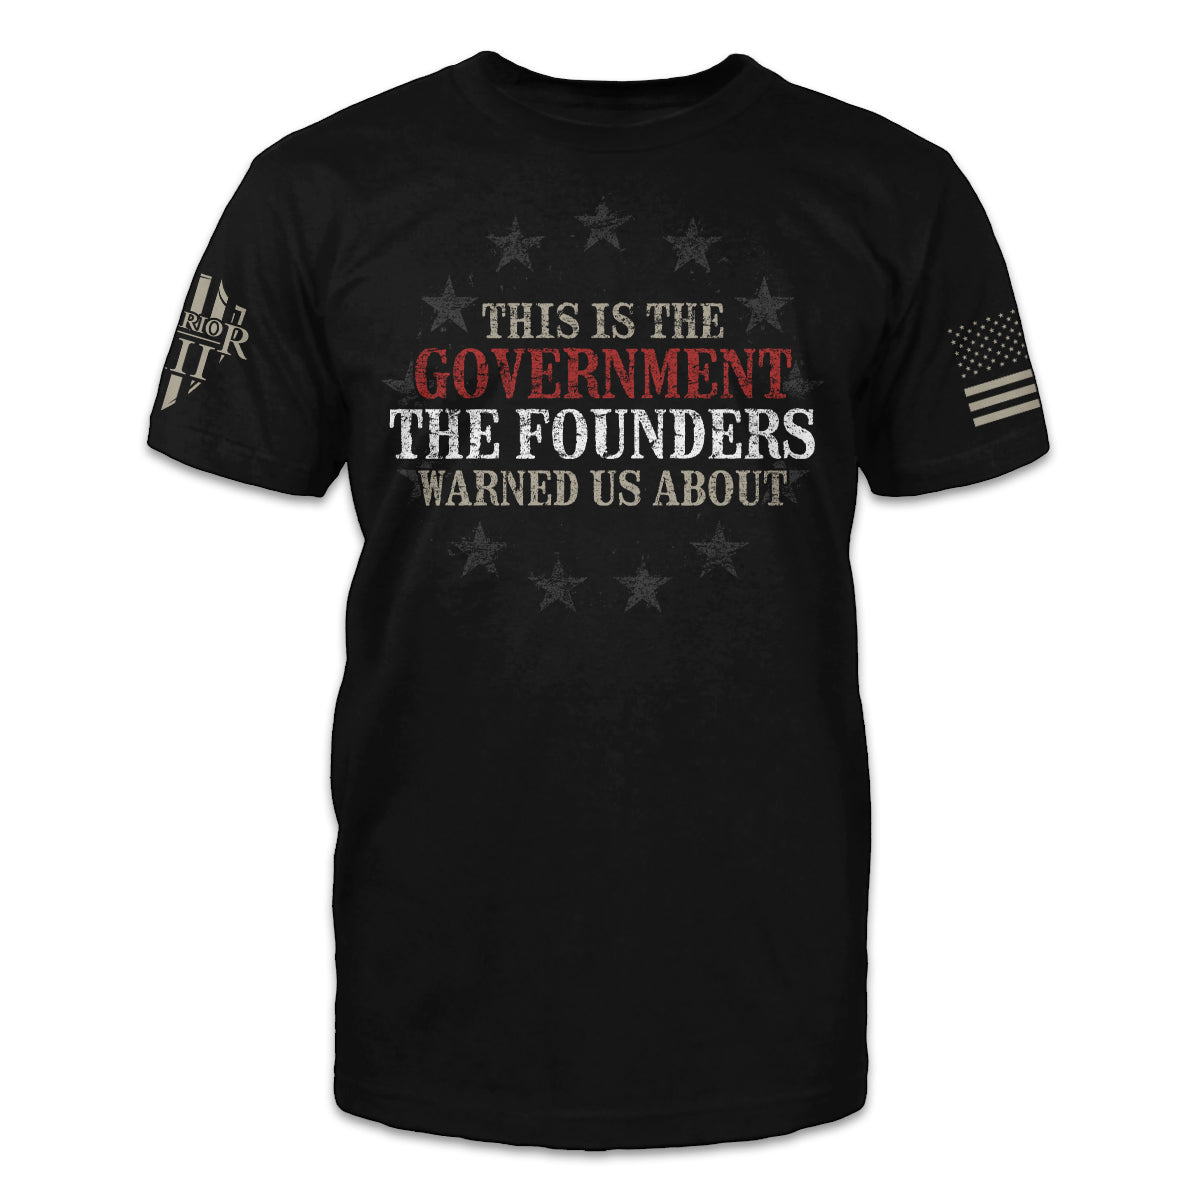 A black t-shirt with the words "This is the government the founders warned us about" printed on the front.